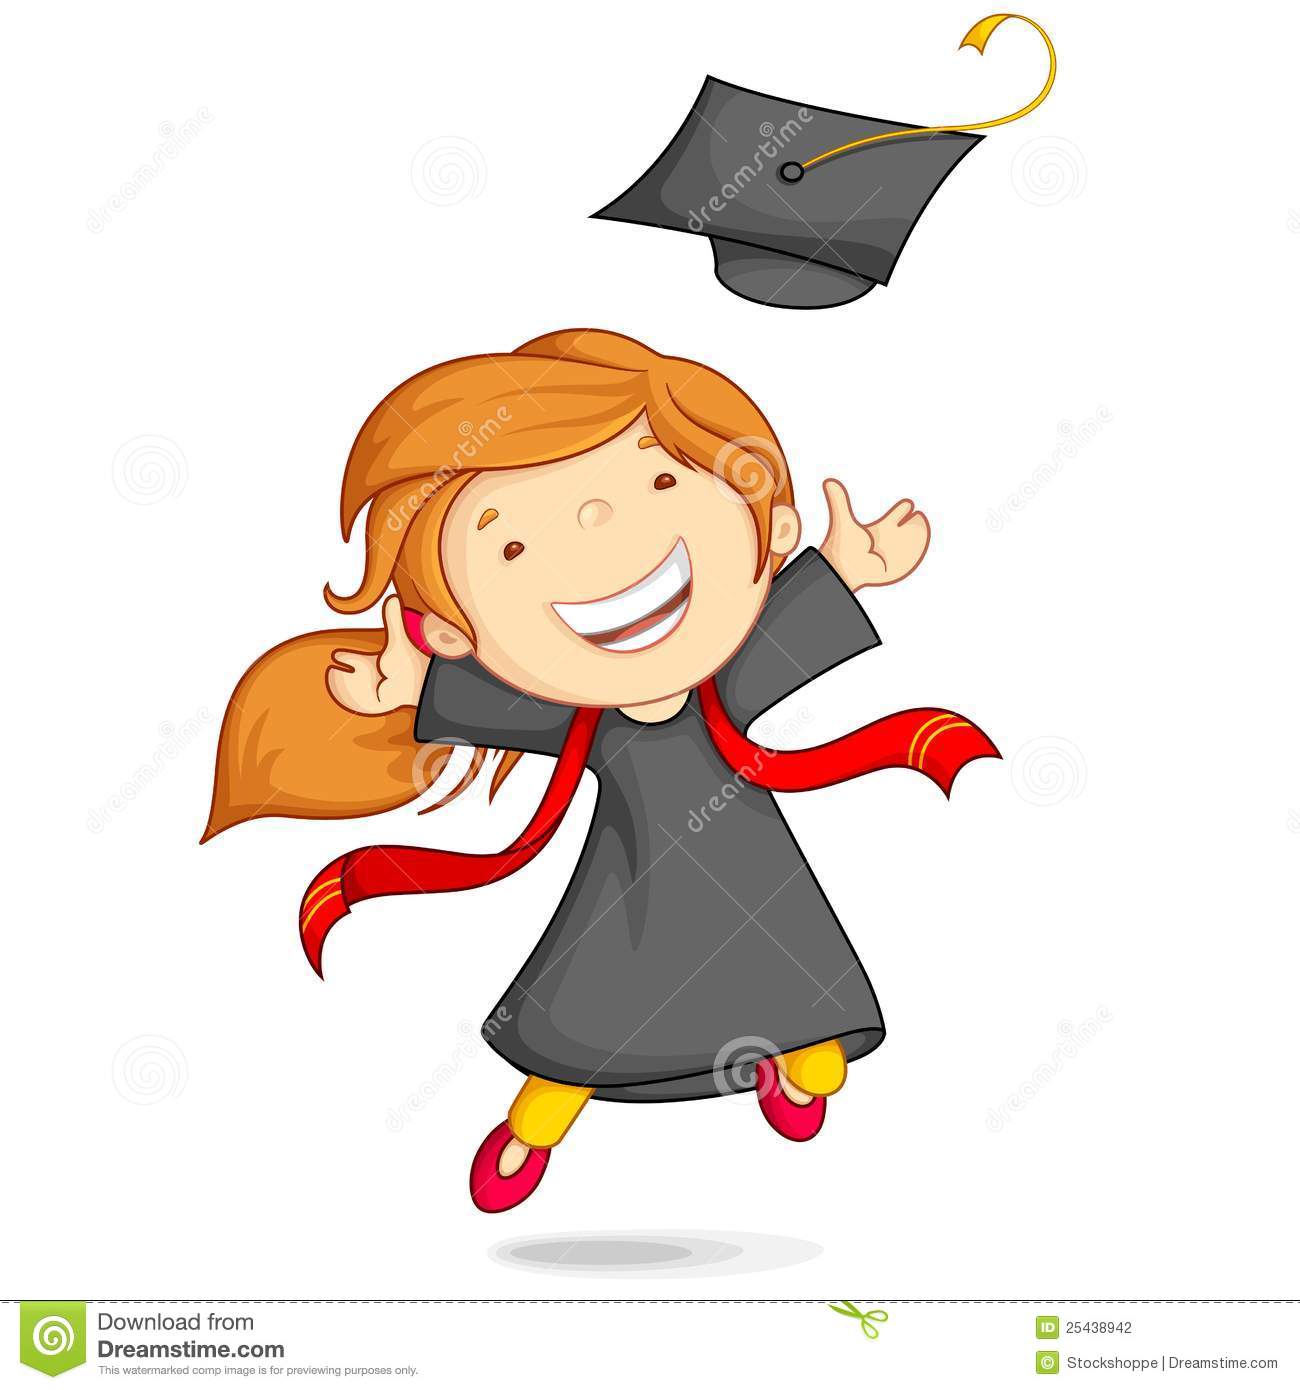 Vector Illustration Of Girl In Graduation Gown And Mortar Board